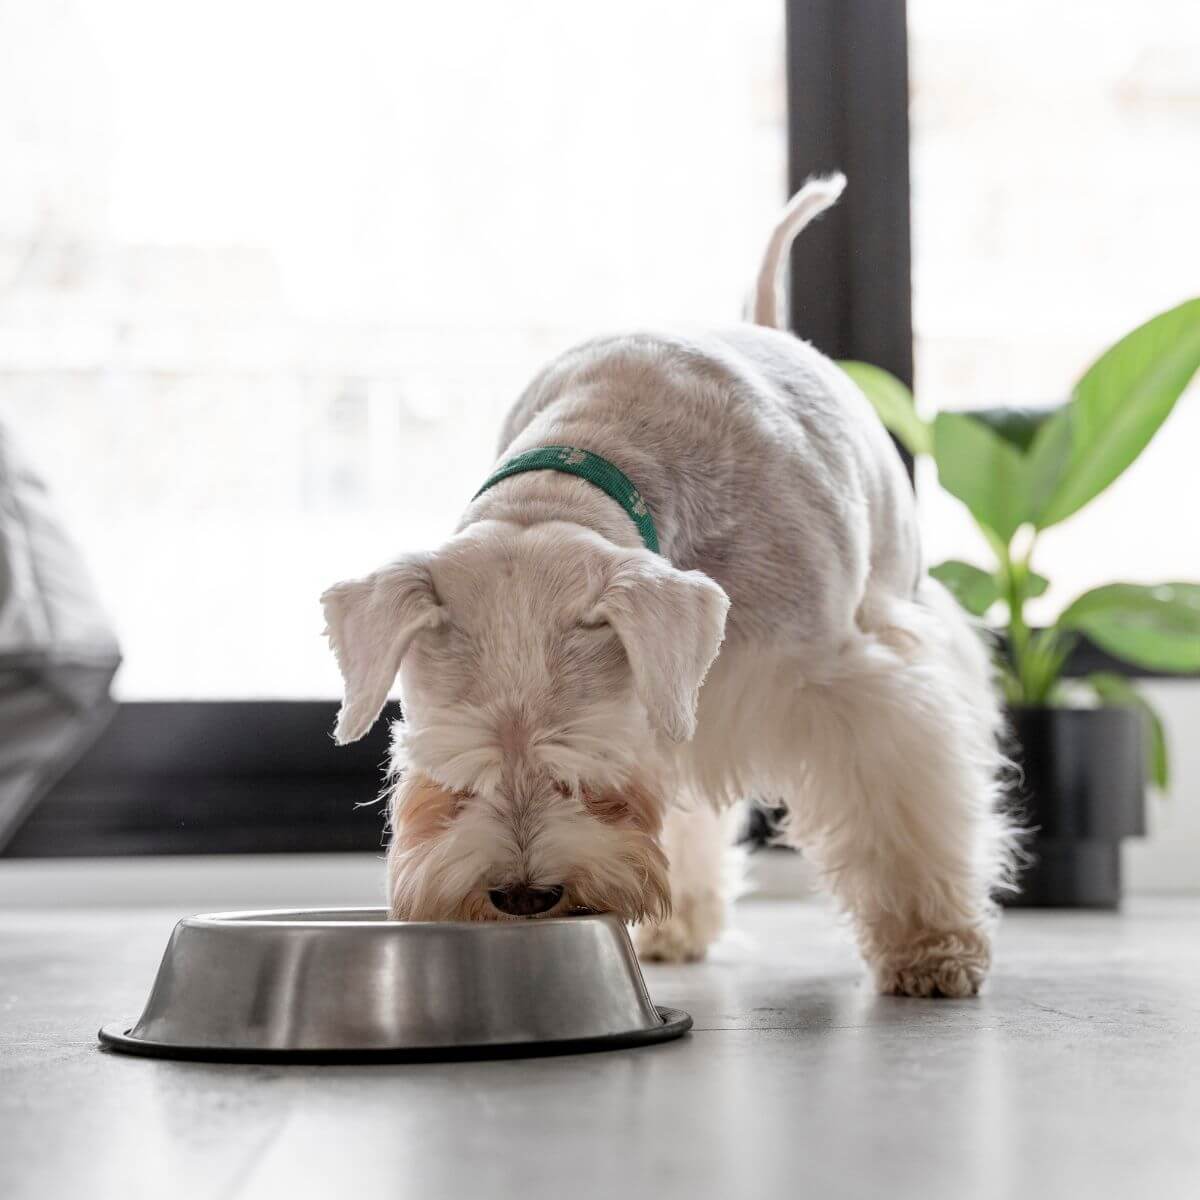 What's the Impact of Dog Food On The Environment?